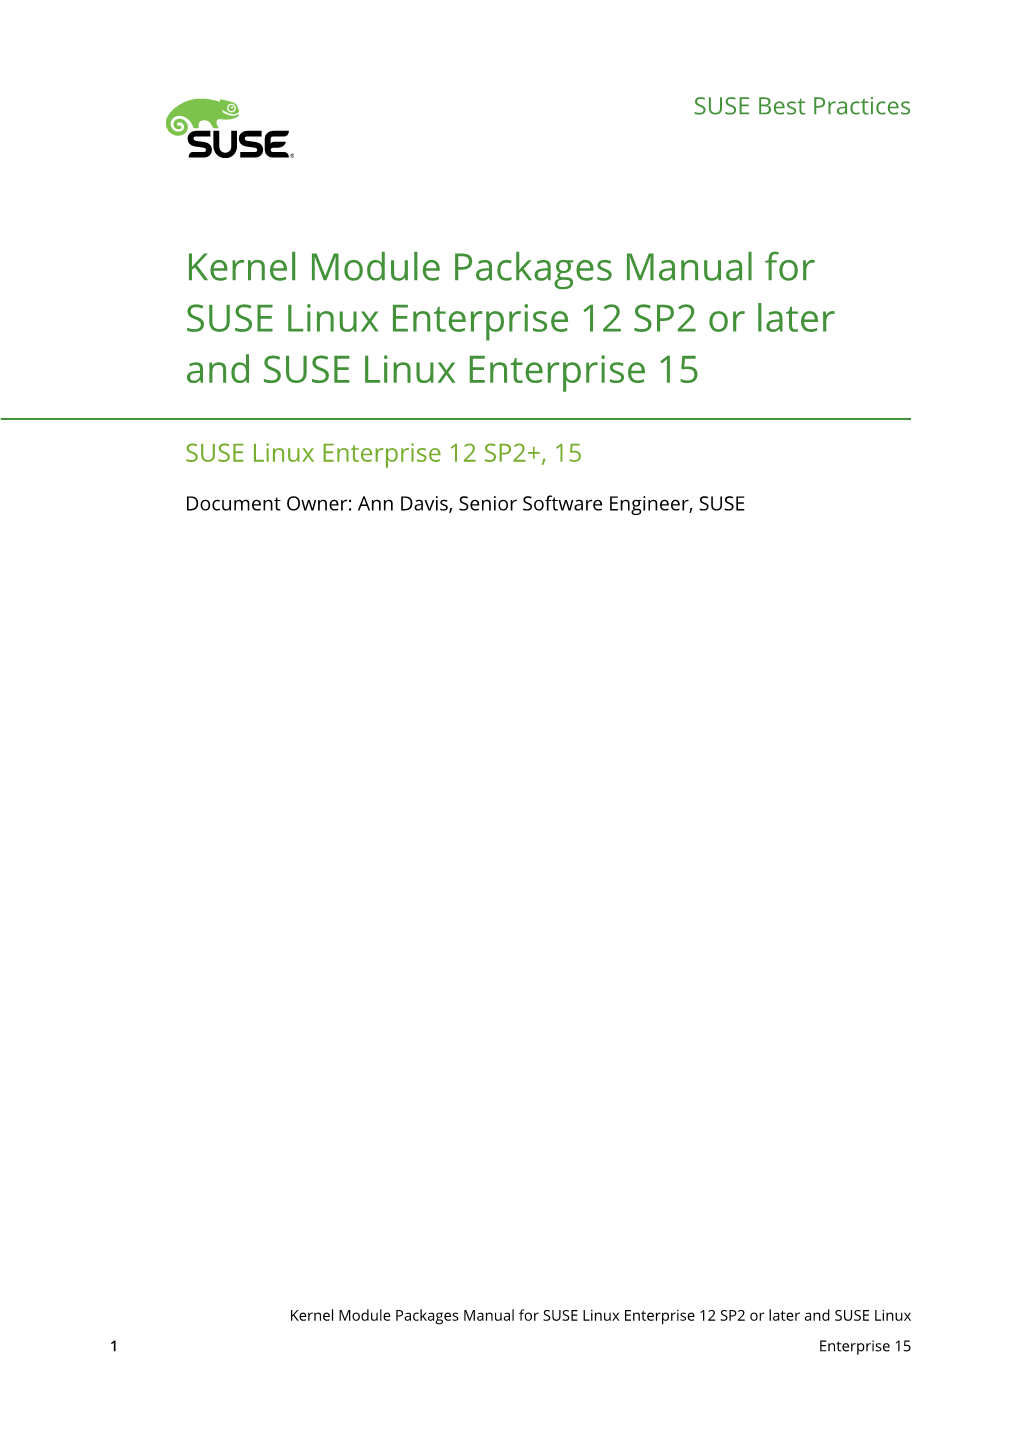 Kernel Module Packages Manual for SUSE Linux Enterprise 12 SP2 Or Later and SUSE Linux Enterprise 15